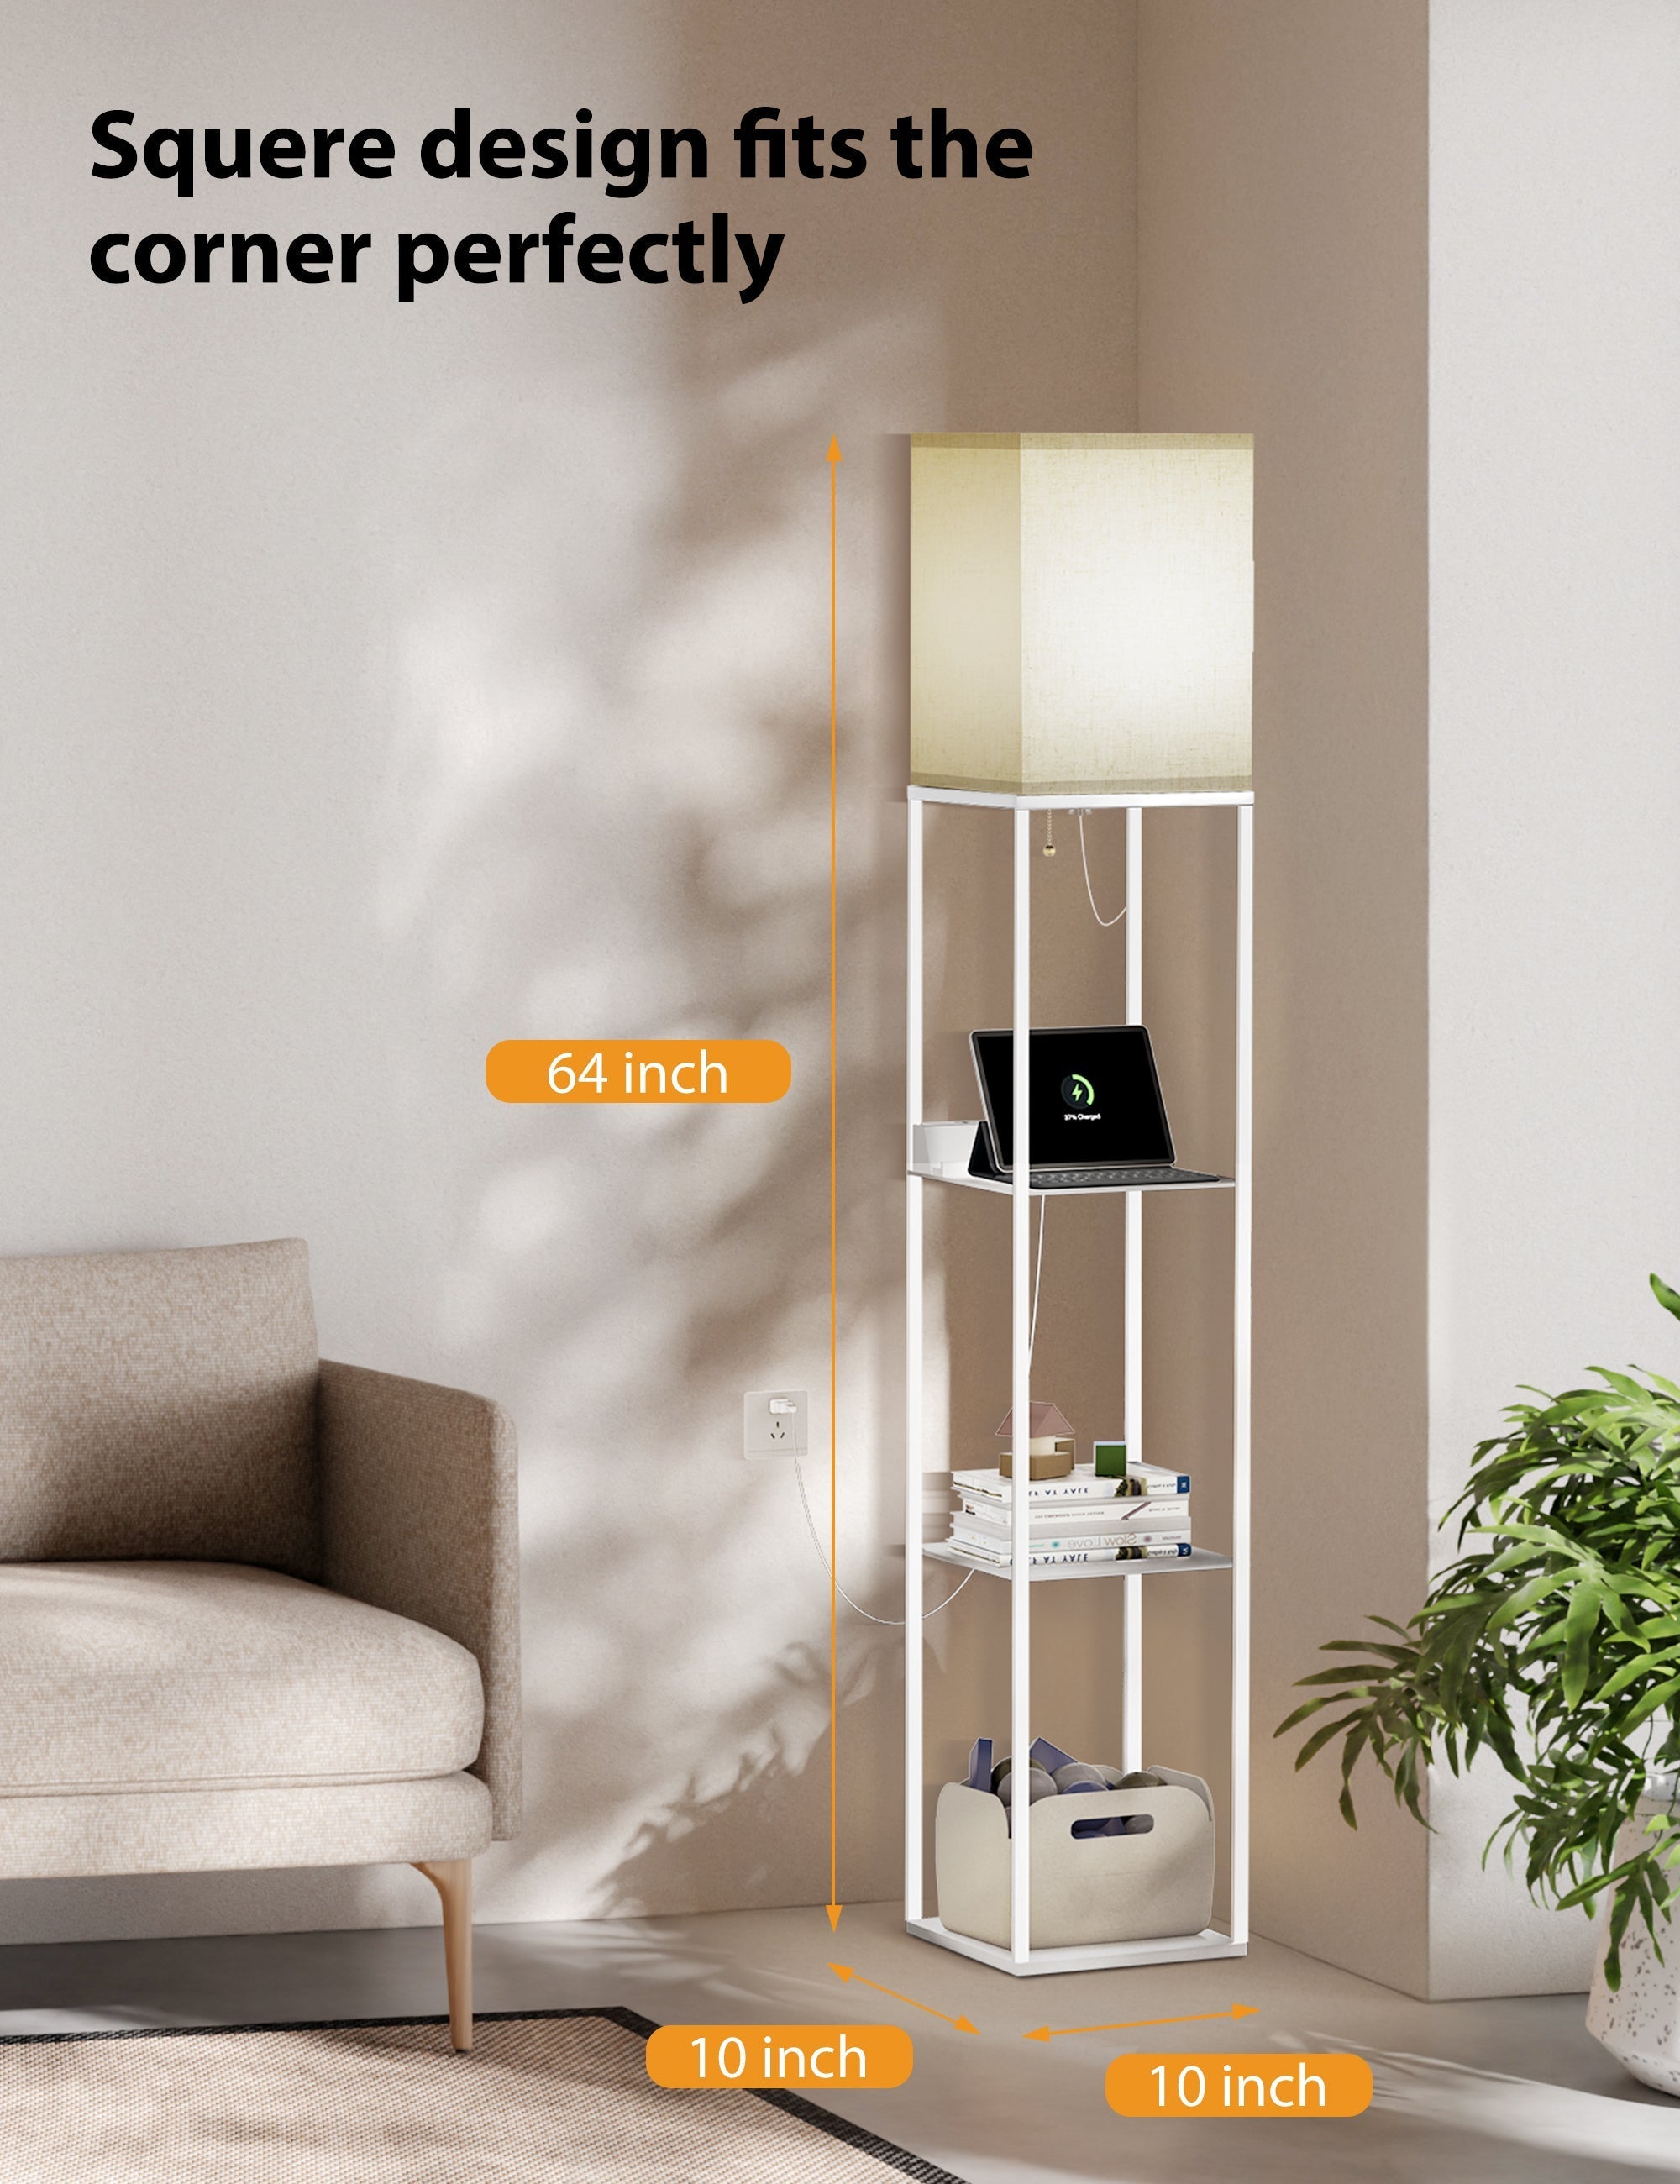 Evajoy Floor Lamp with Shelves, Smart RGB Floor Lamps Work with Alexa, with 2 USB Ports & 1 AC Output, Modern 4-tier Lamp for Display Storage, Floor Lamps for Living Room, Bedroom, Office